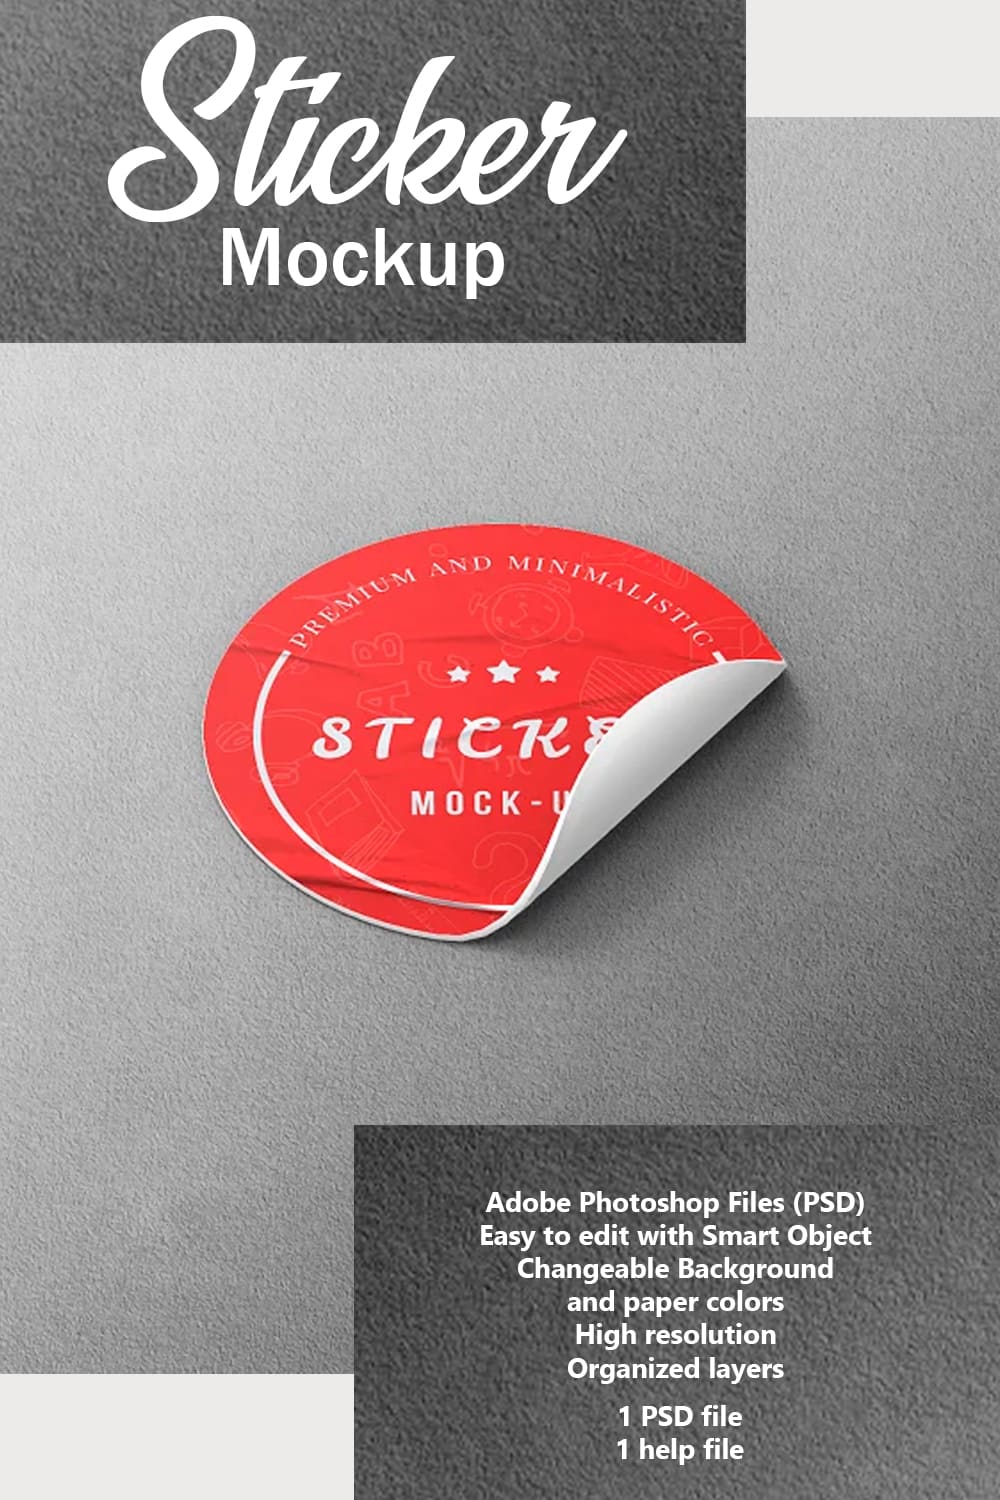 Irresistible round sticker mockup image in red color.